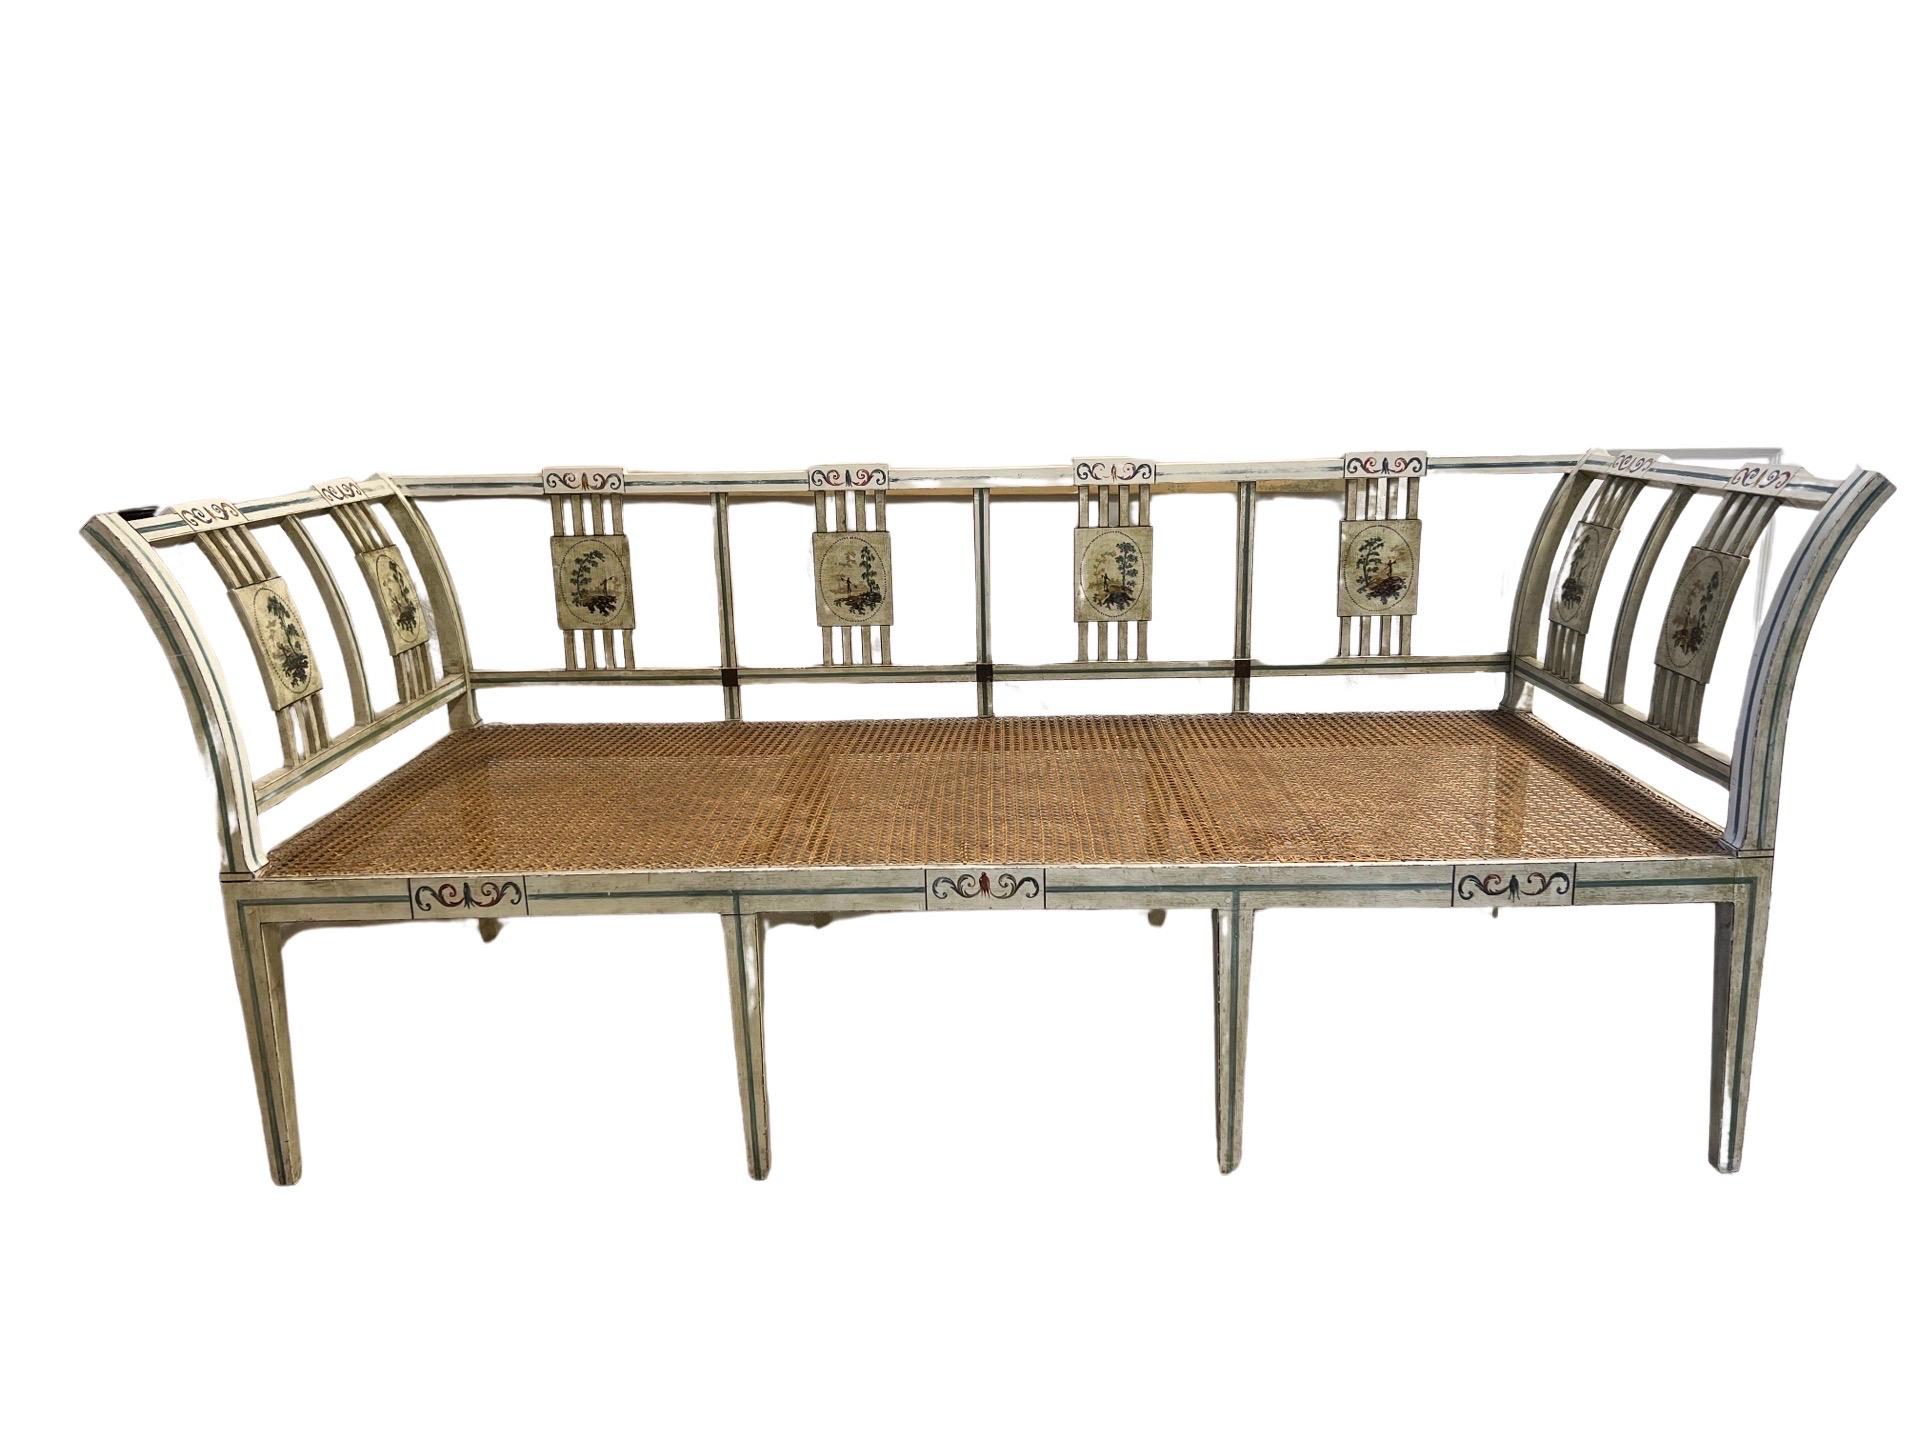 20th Century Italian Neoclassical Style Polychrome Decorated Day Bed C. 1940 For Sale